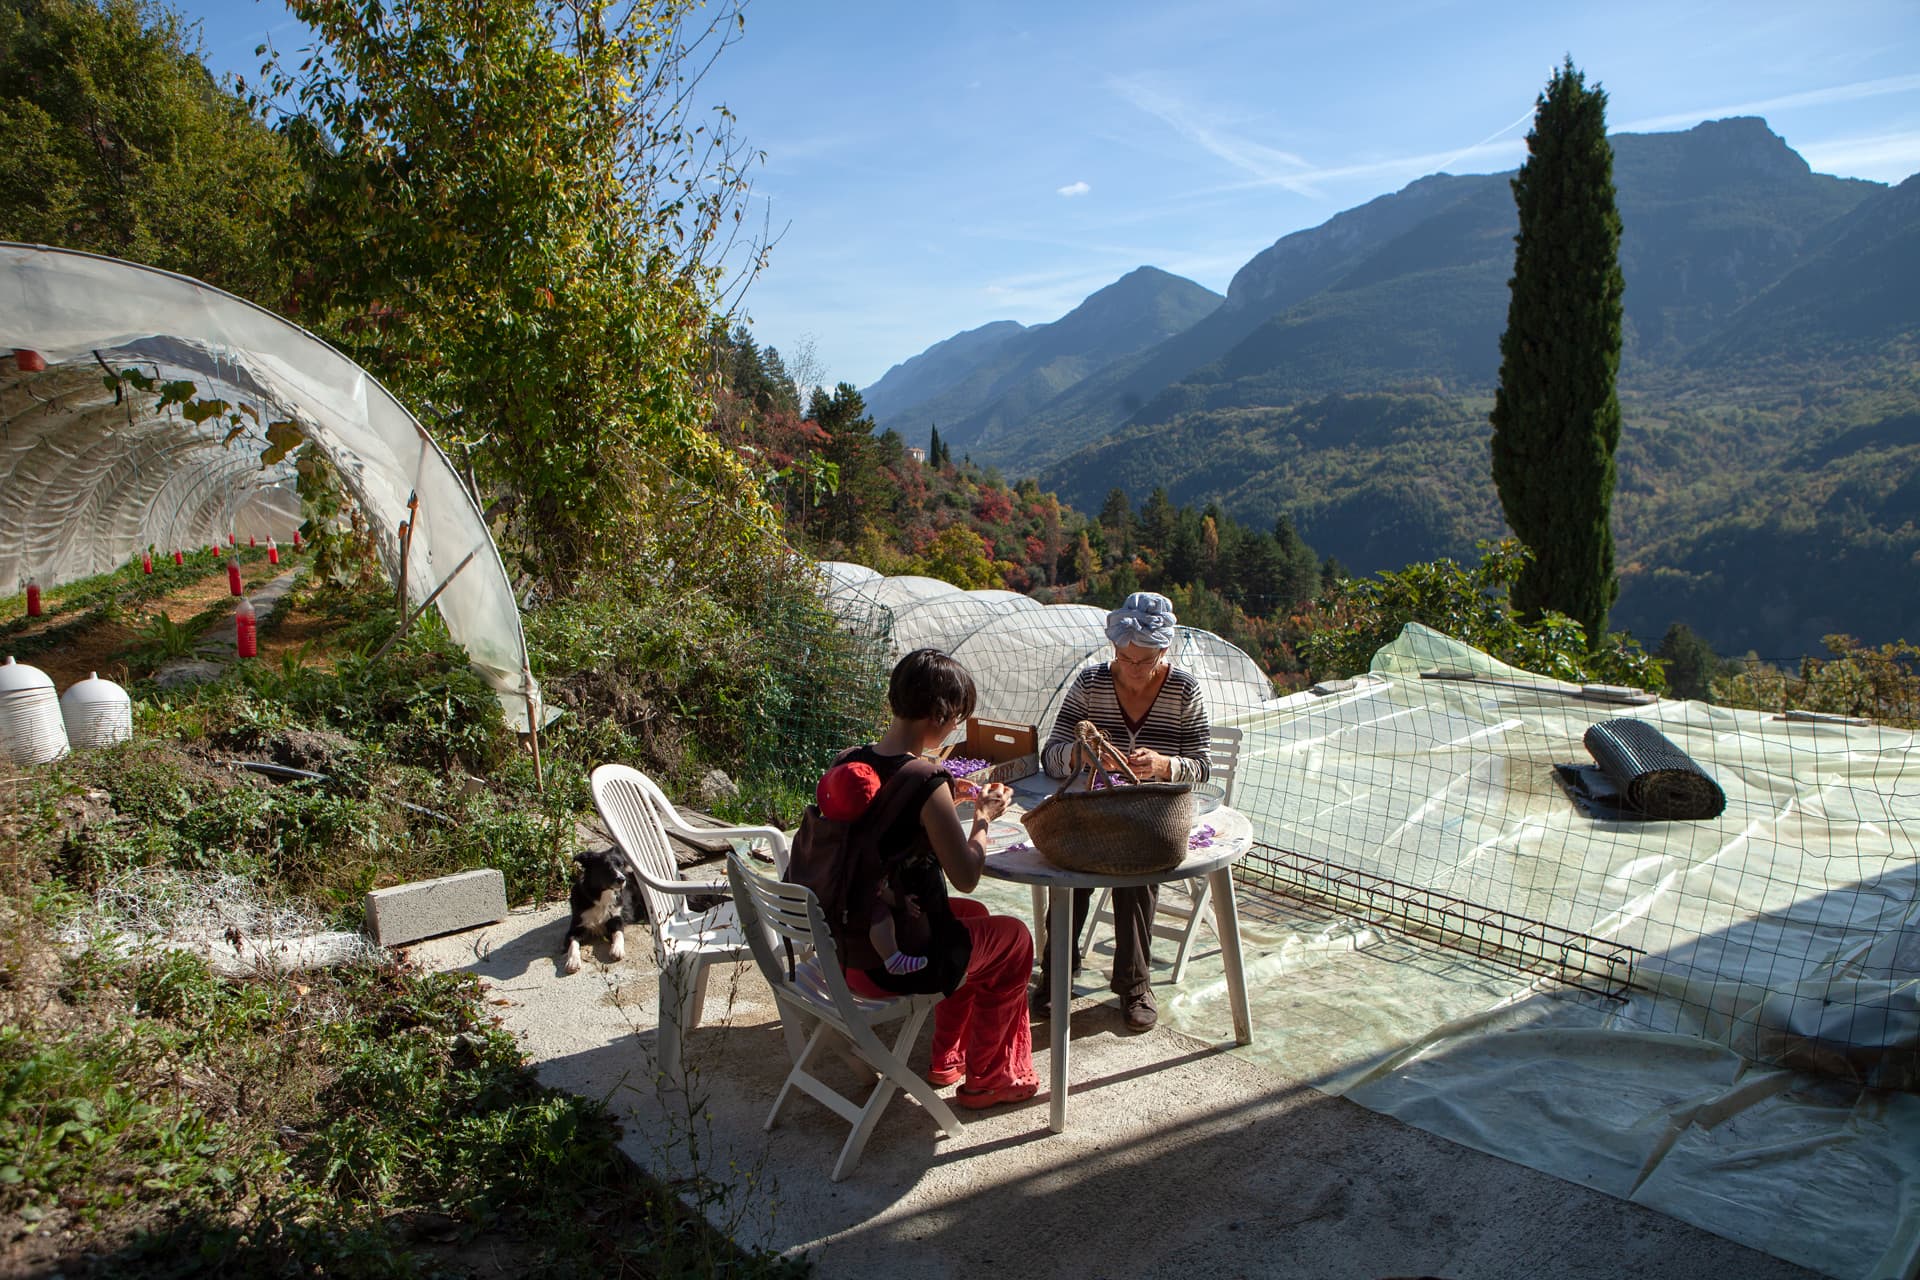 Two women sit working at a table on a terrace, with a greenhouse and mountains in the background